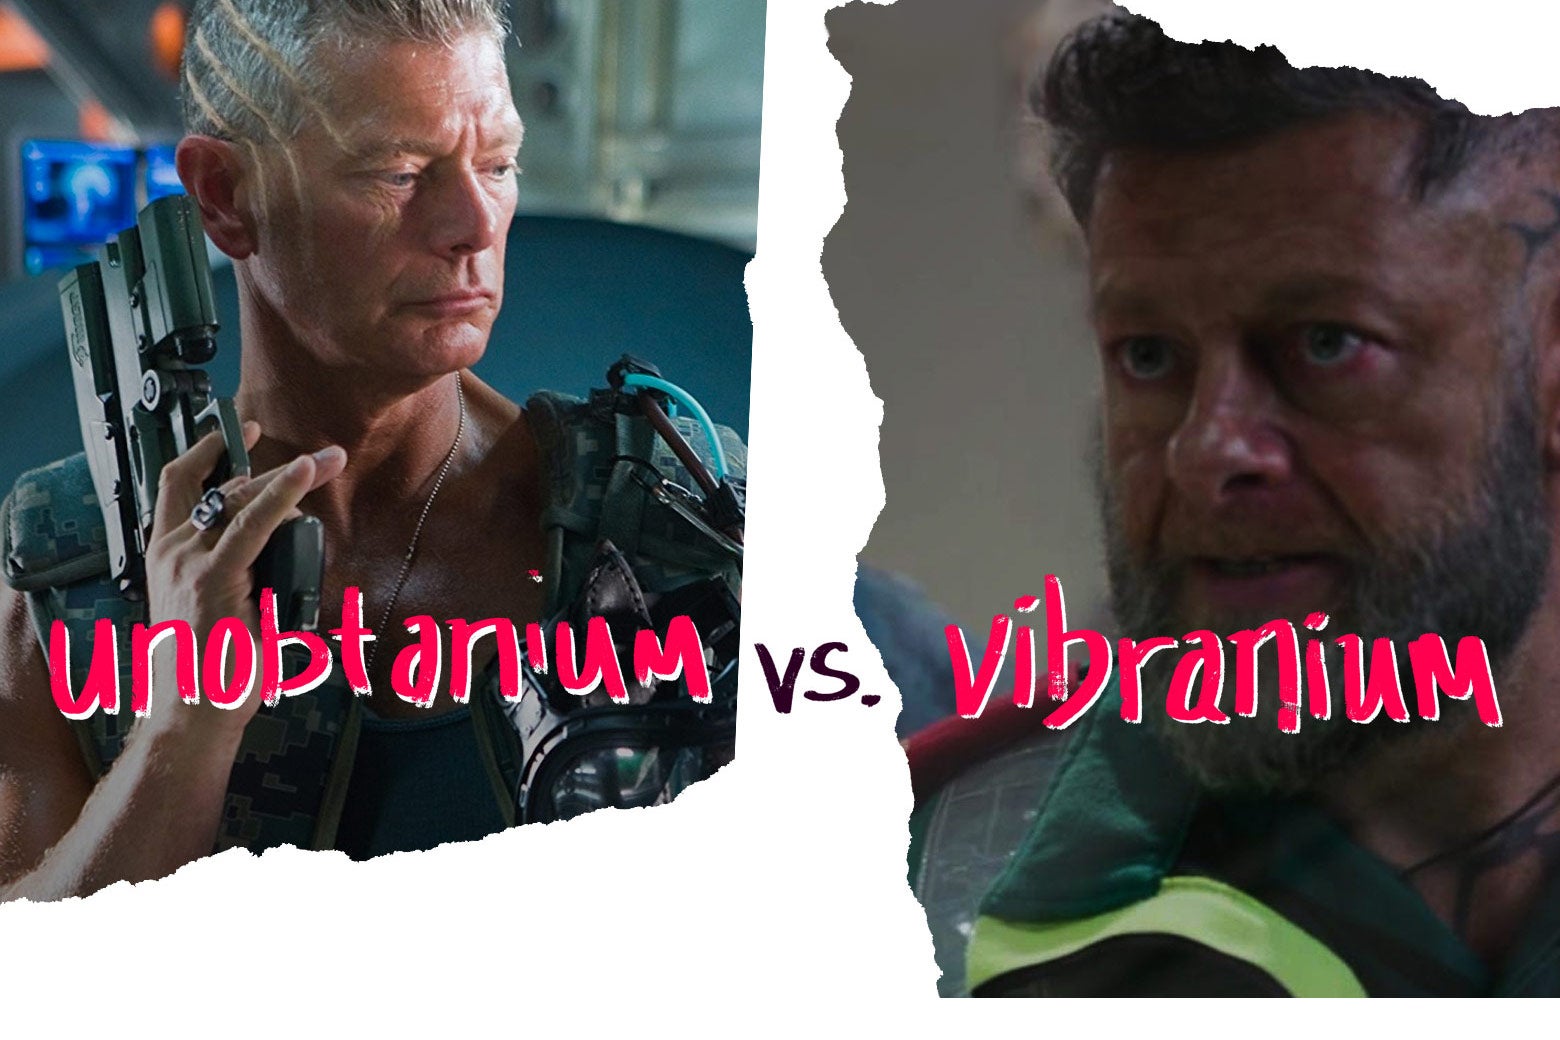 Col. Miles Quaritch from Avatar, played by Stephen Lang, and Andy Serkis’ Klaue from Black Panther.